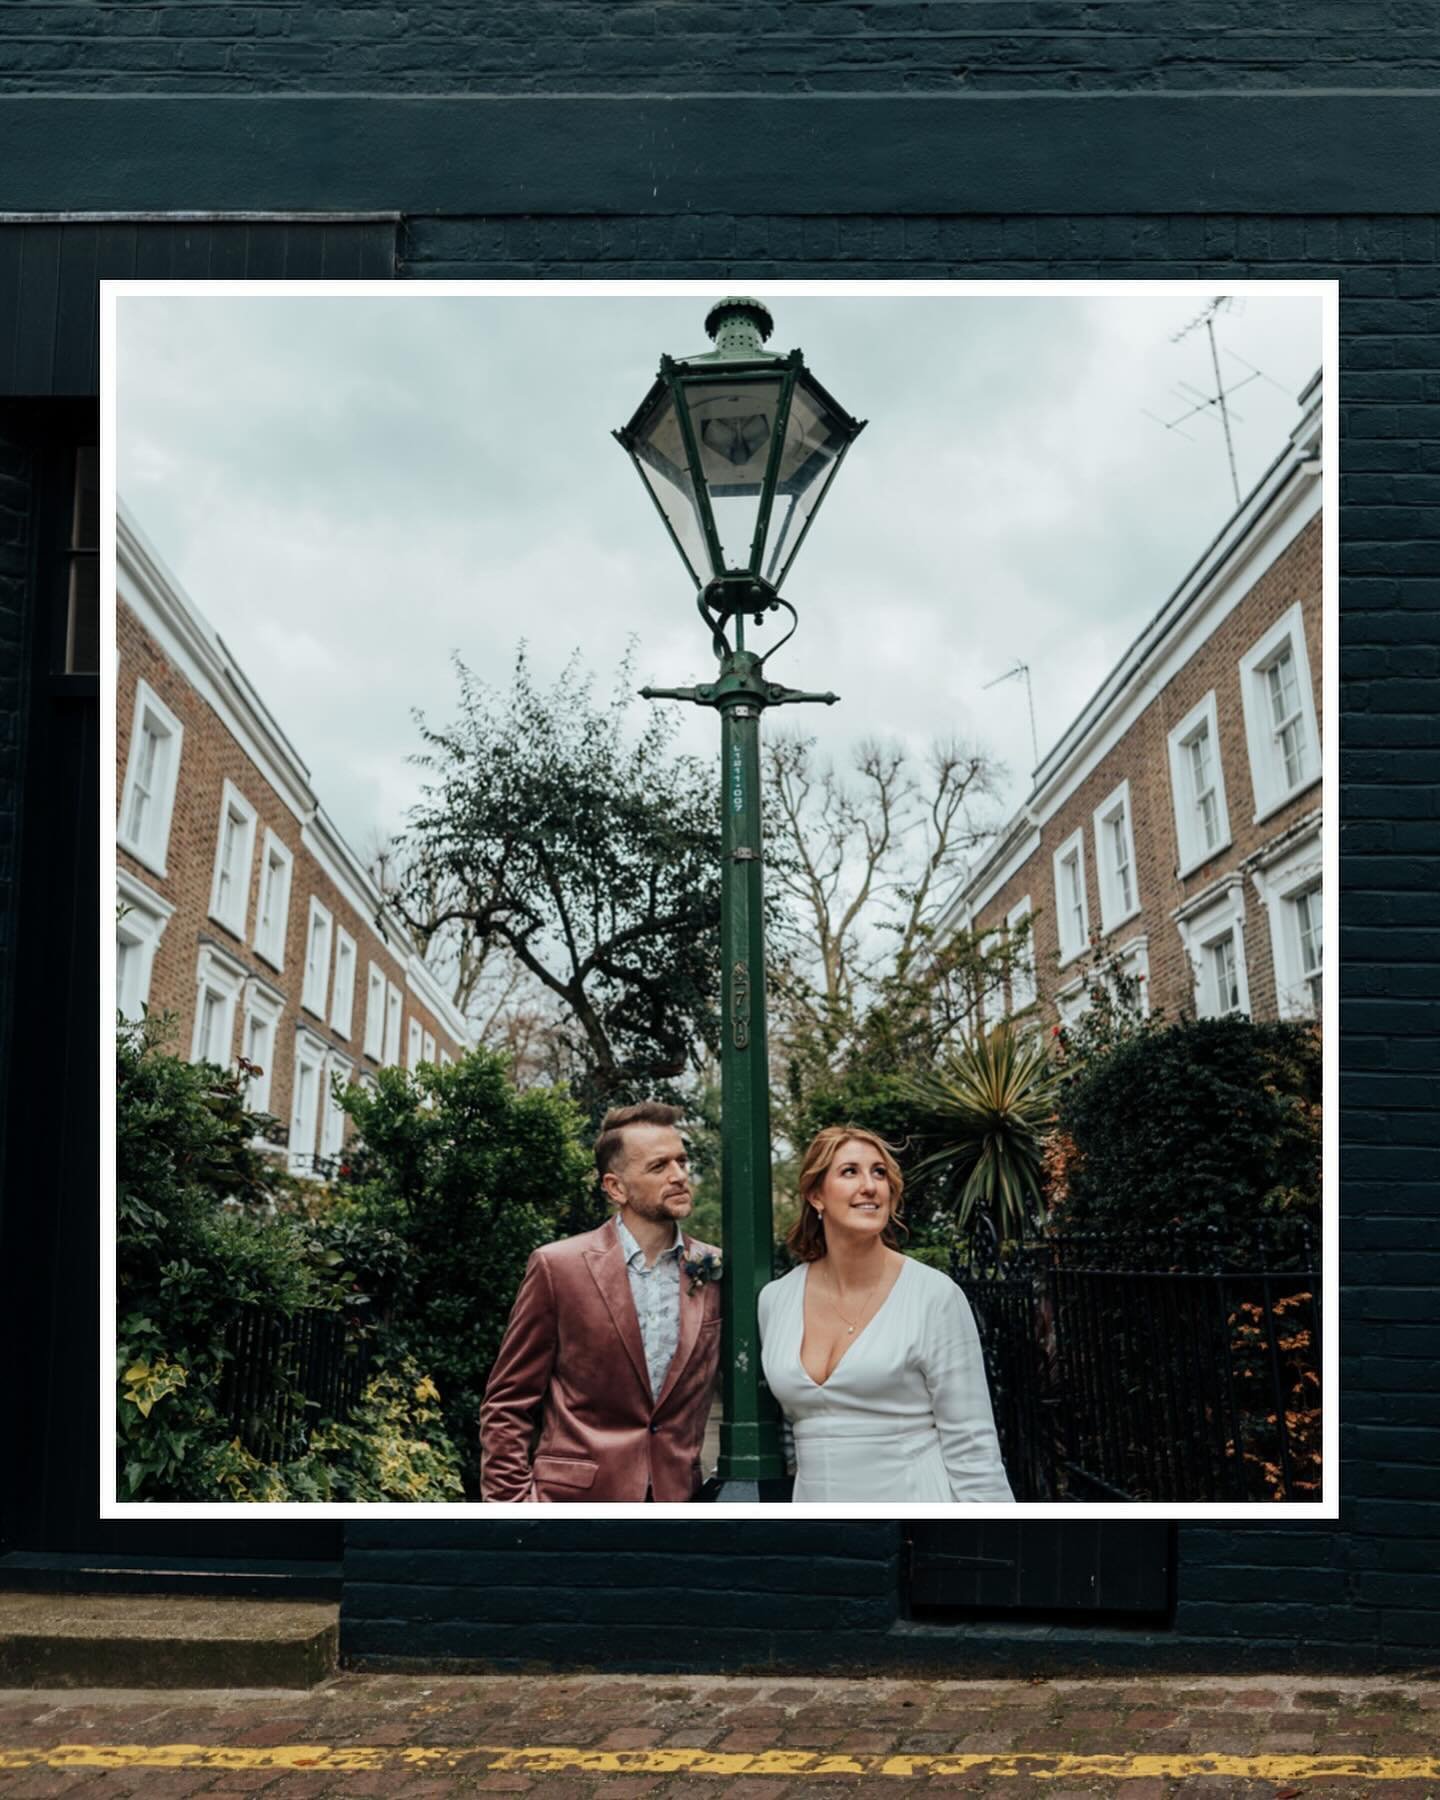 Happy 1 week anniversary to Jen and Tom! The two of them married at the Old Marylebone Town Hall last Friday in the company of their two kids and close family. It was a beautiful spring day (yay finally!), and we went for a little drive around London